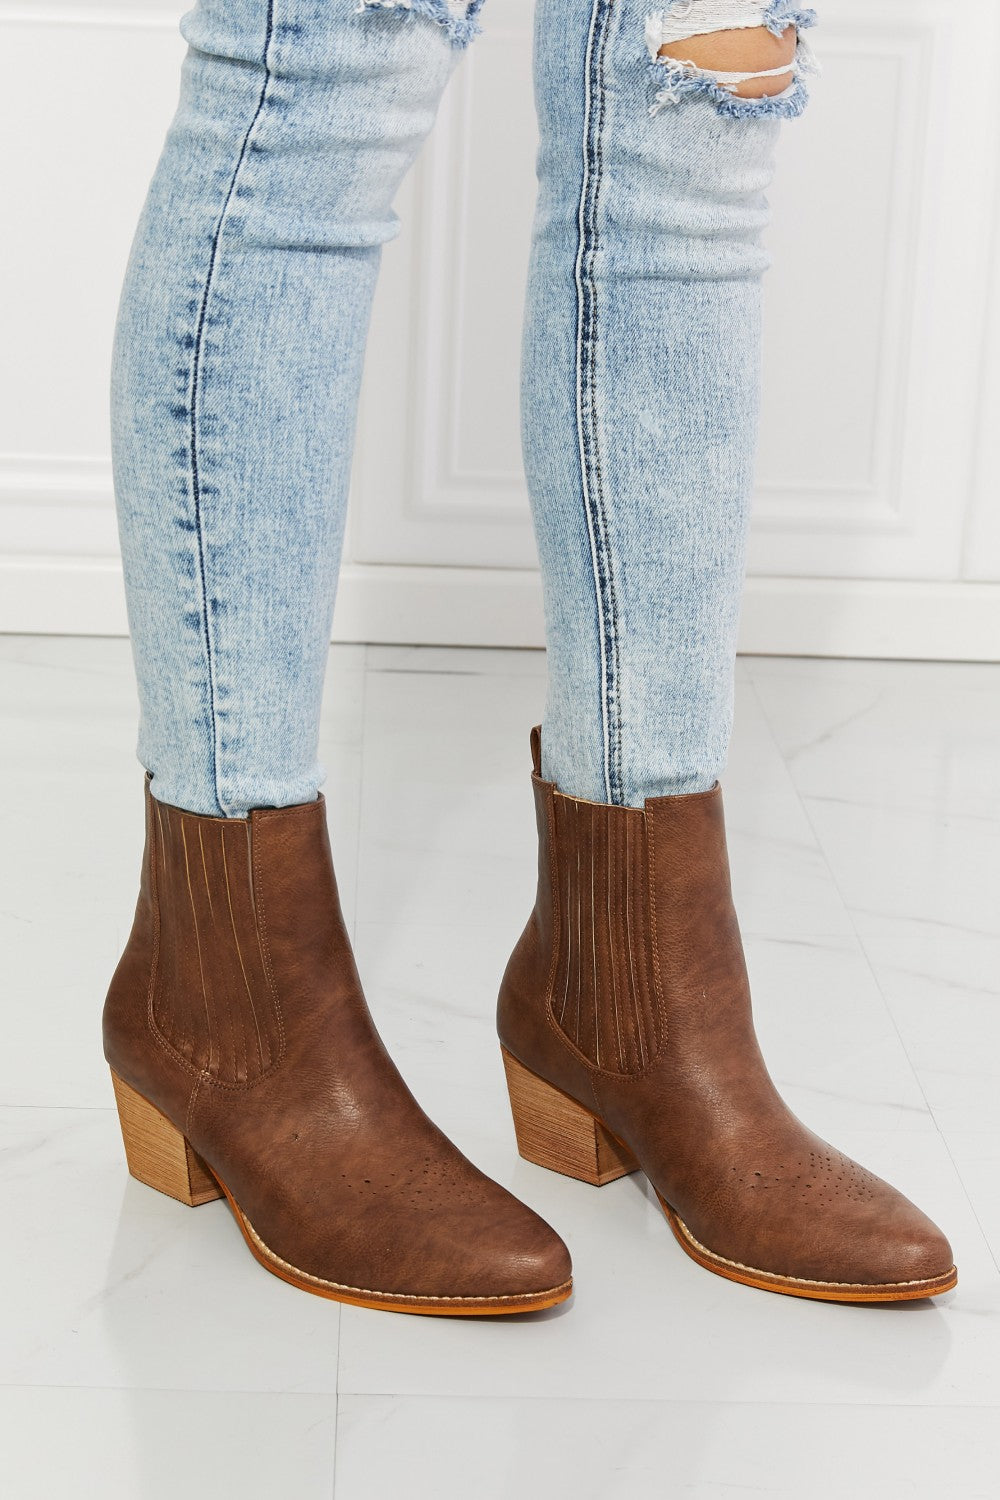 MMShoes Love the Journey Stacked Heel Chelsea Boot in Chestnut - AllIn Computer